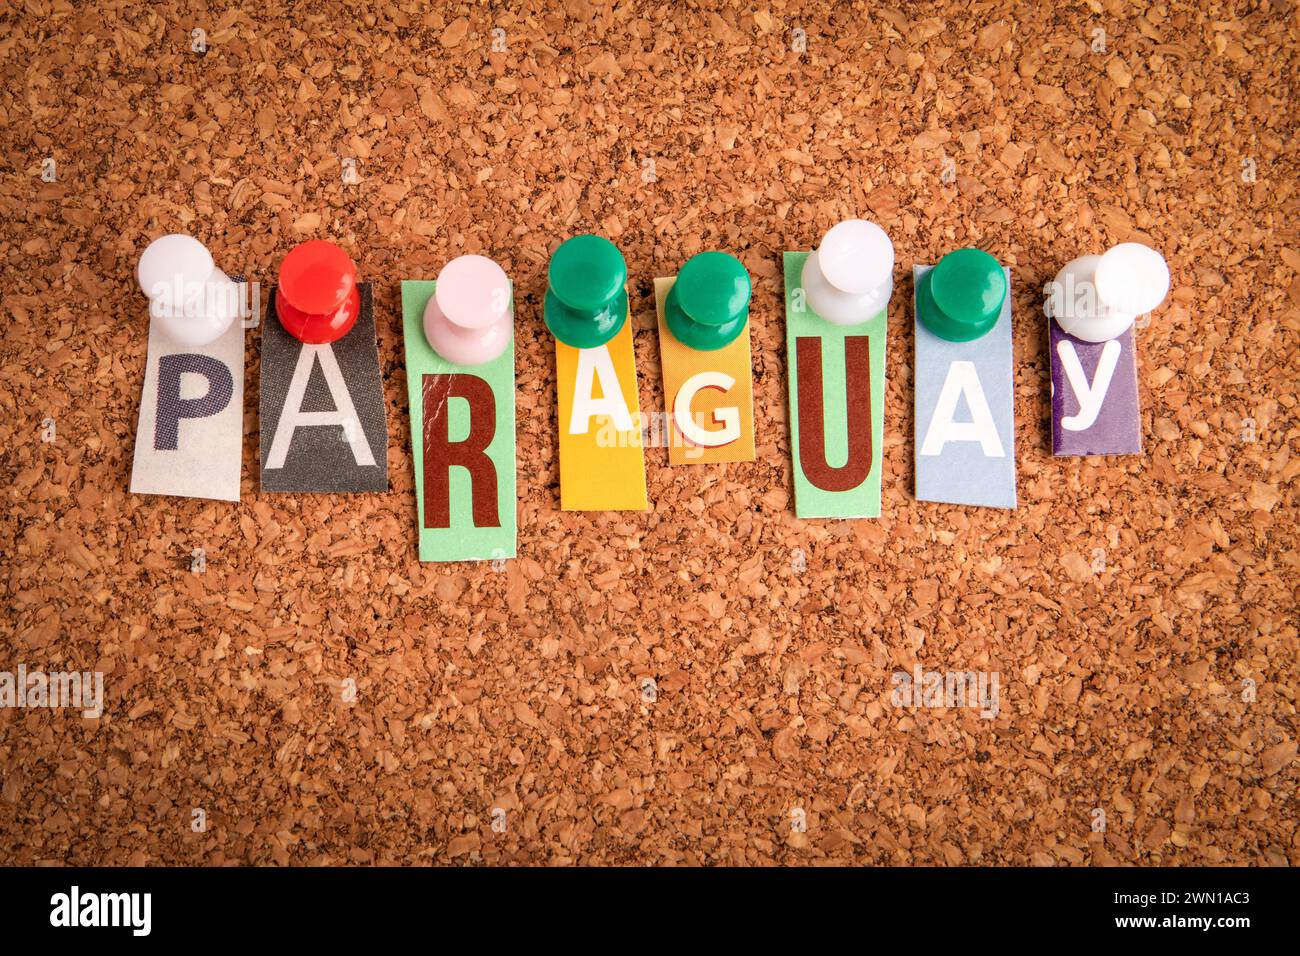 PARAGUAY. Letters pinned to a cork notice board. Stock Photo